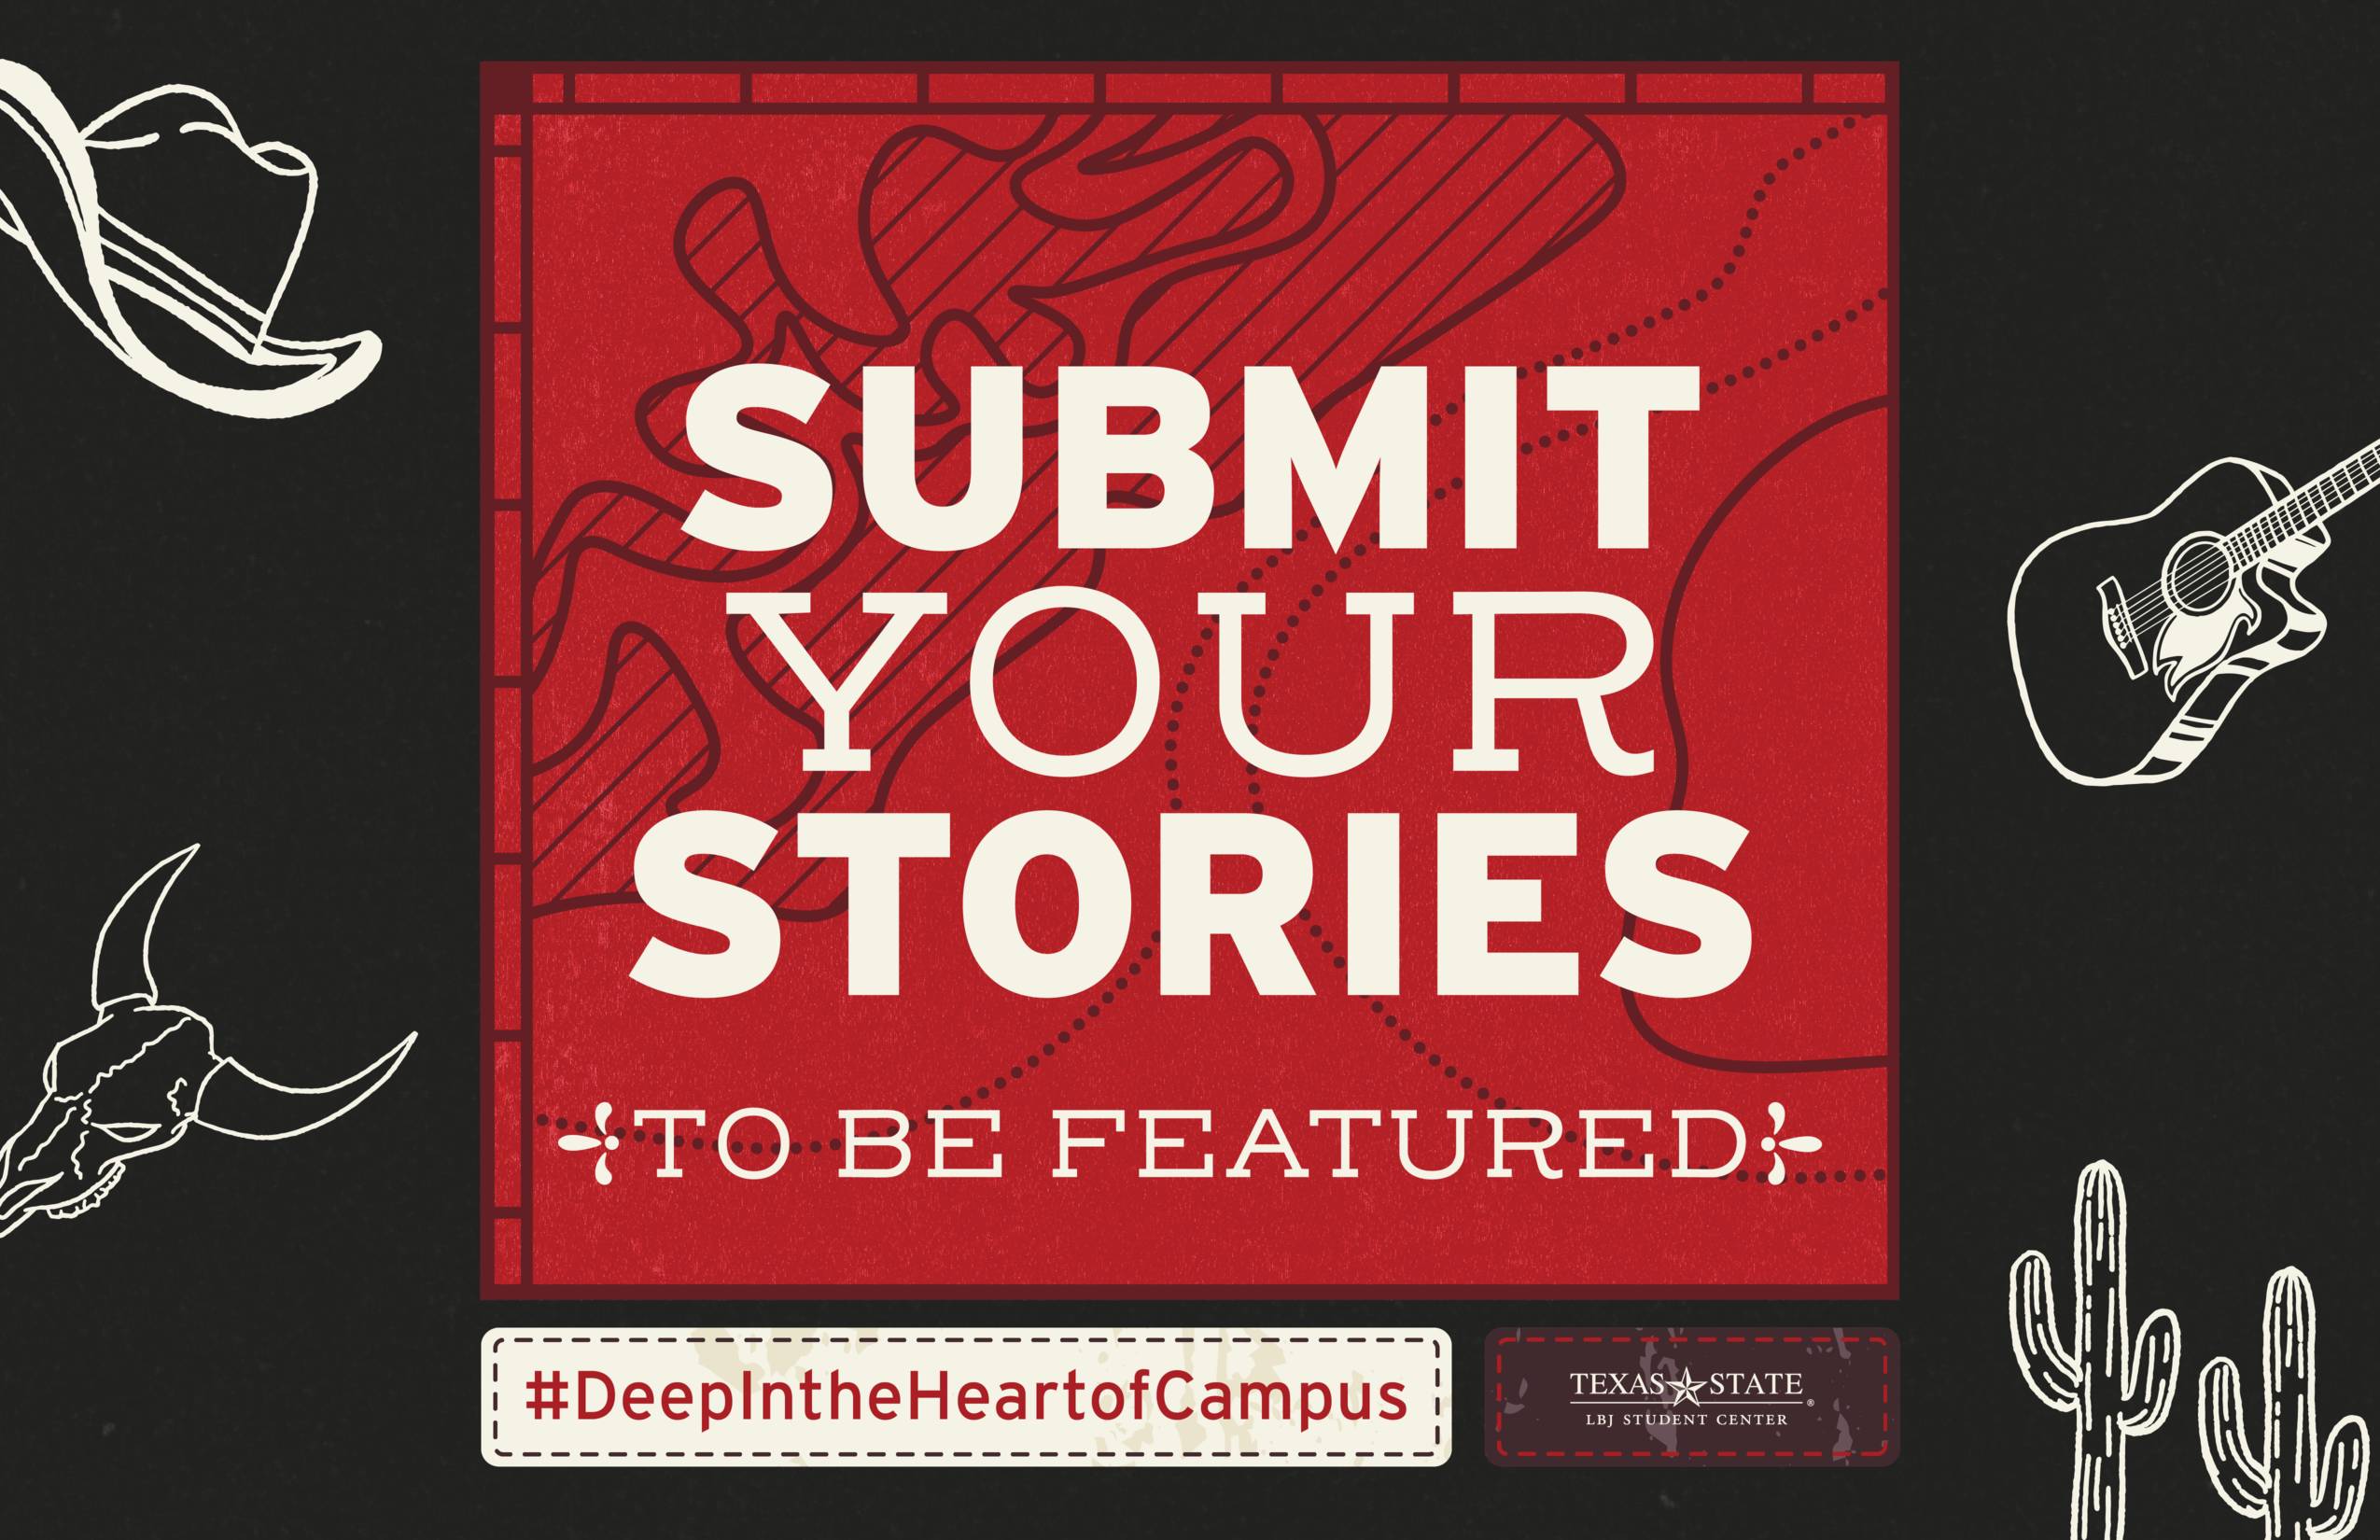 The graphic image shows a topographical map overlapped with the words "deep in the heart of campus" and a call for submissions. 